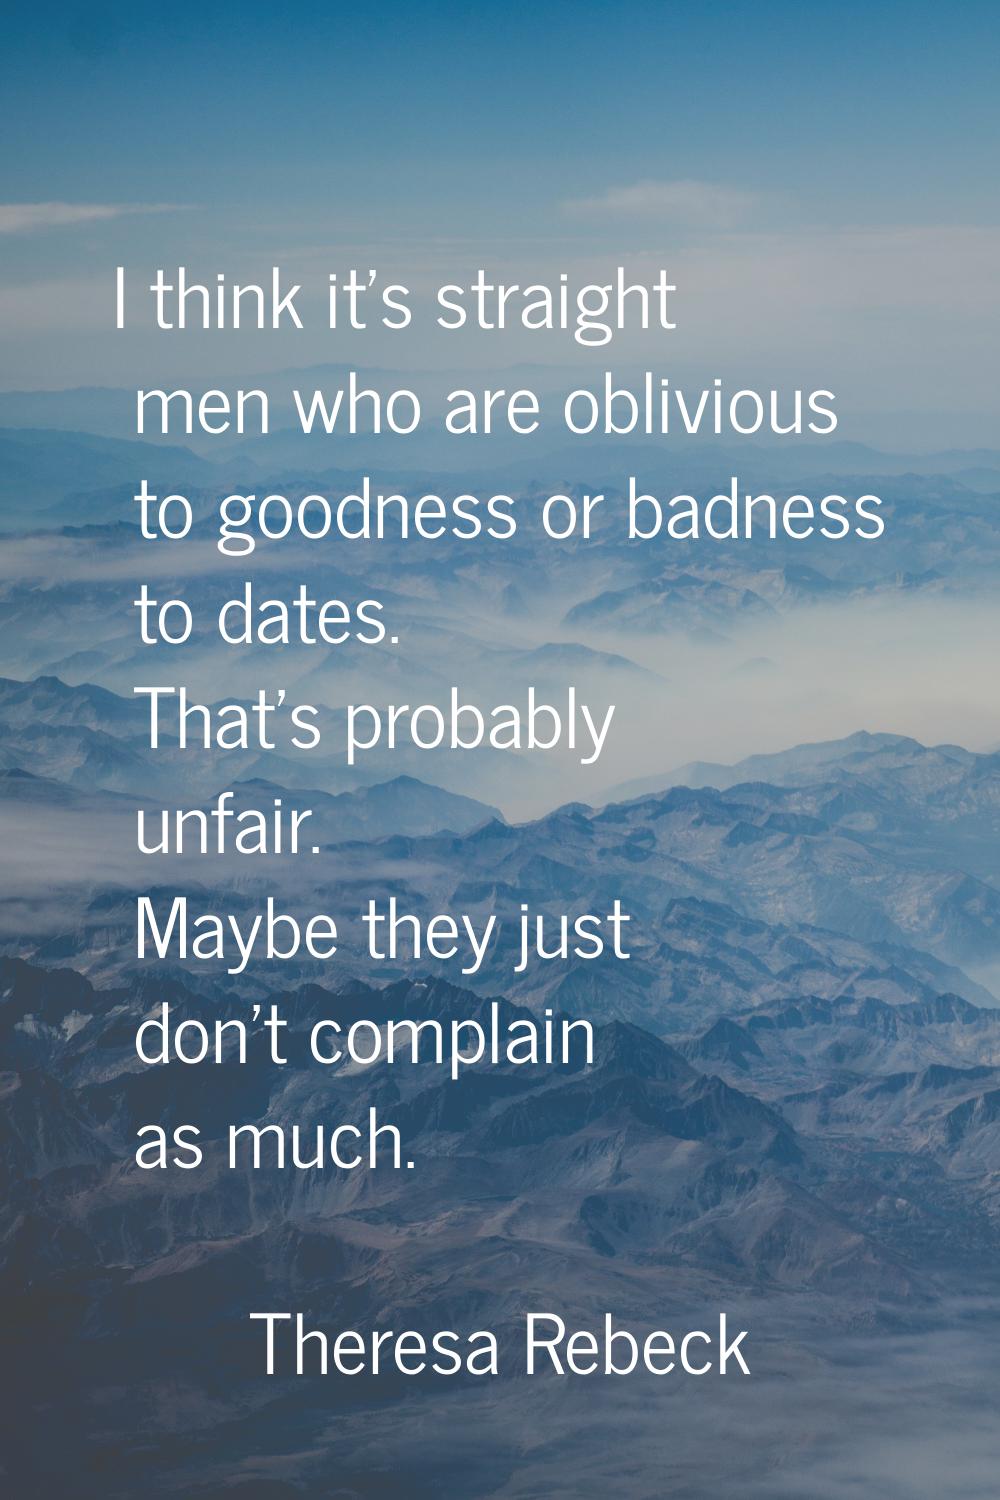 I think it's straight men who are oblivious to goodness or badness to dates. That's probably unfair